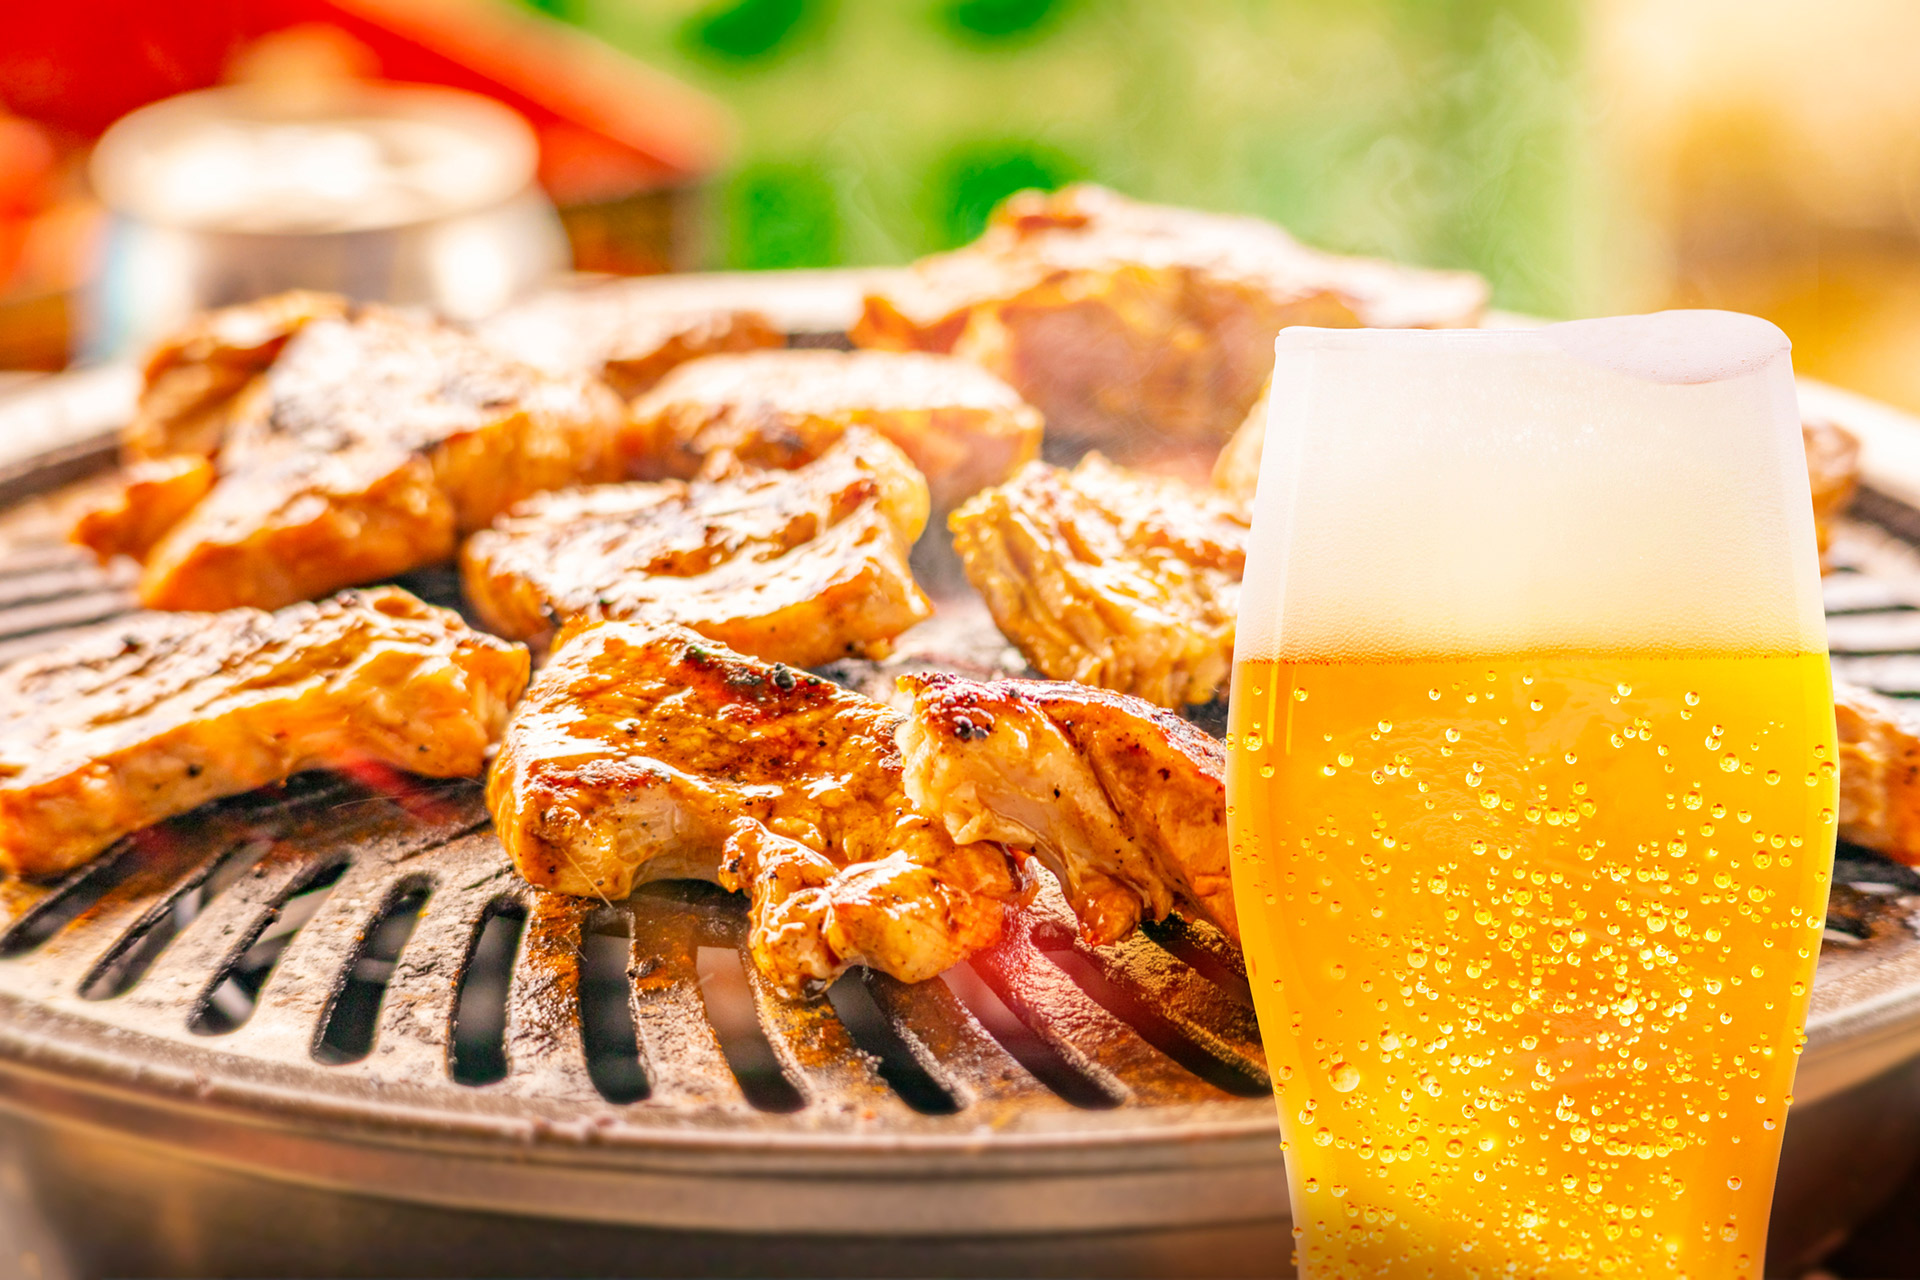 Beer and barbeque